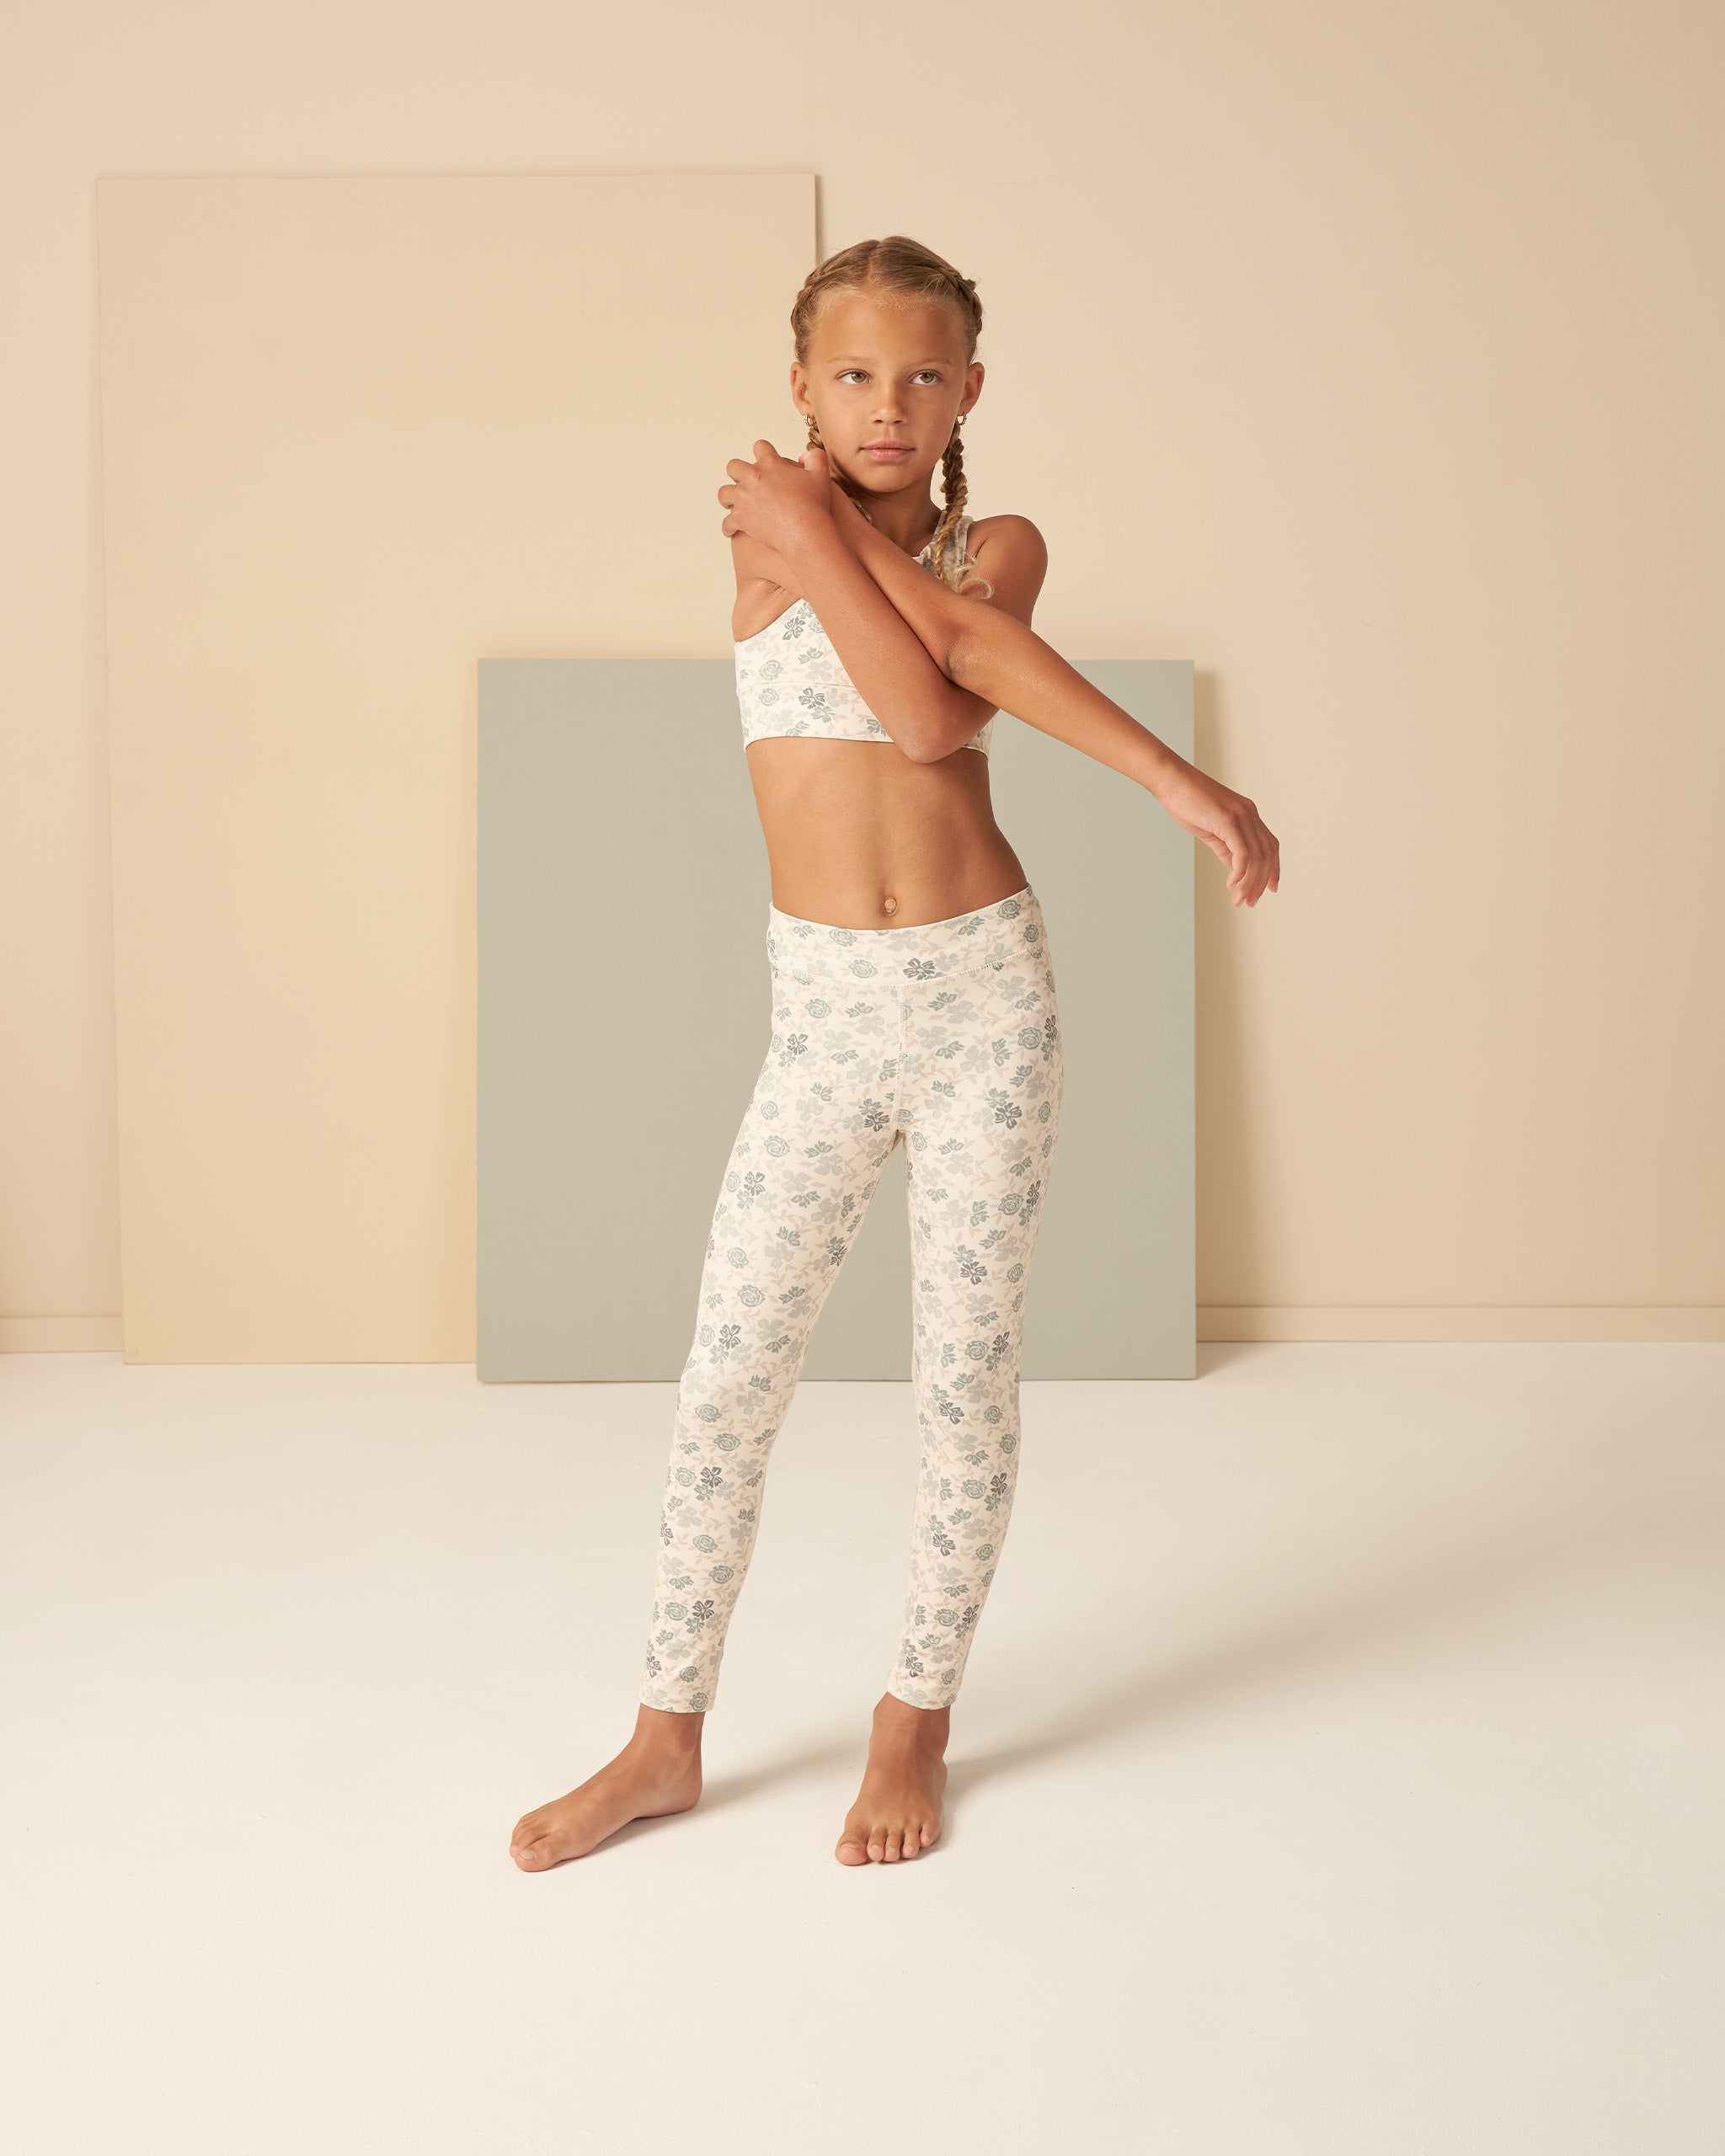 Basic Legging || Blue Floral - Rylee + Cru | Kids Clothes | Trendy Baby Clothes | Modern Infant Outfits |